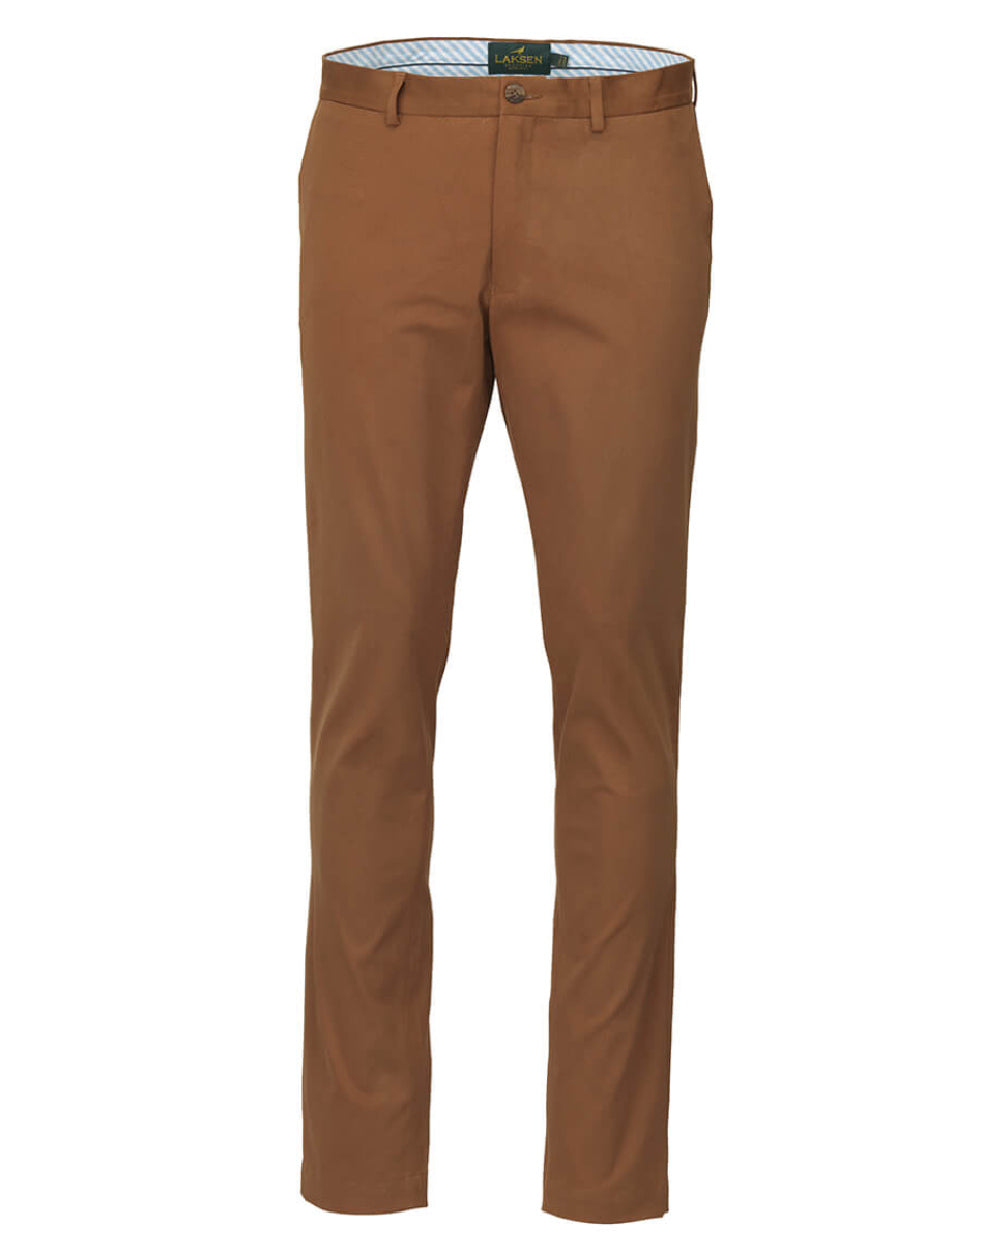 Camel Coloured Laksen Lumley Chino Trousers On A White Background 